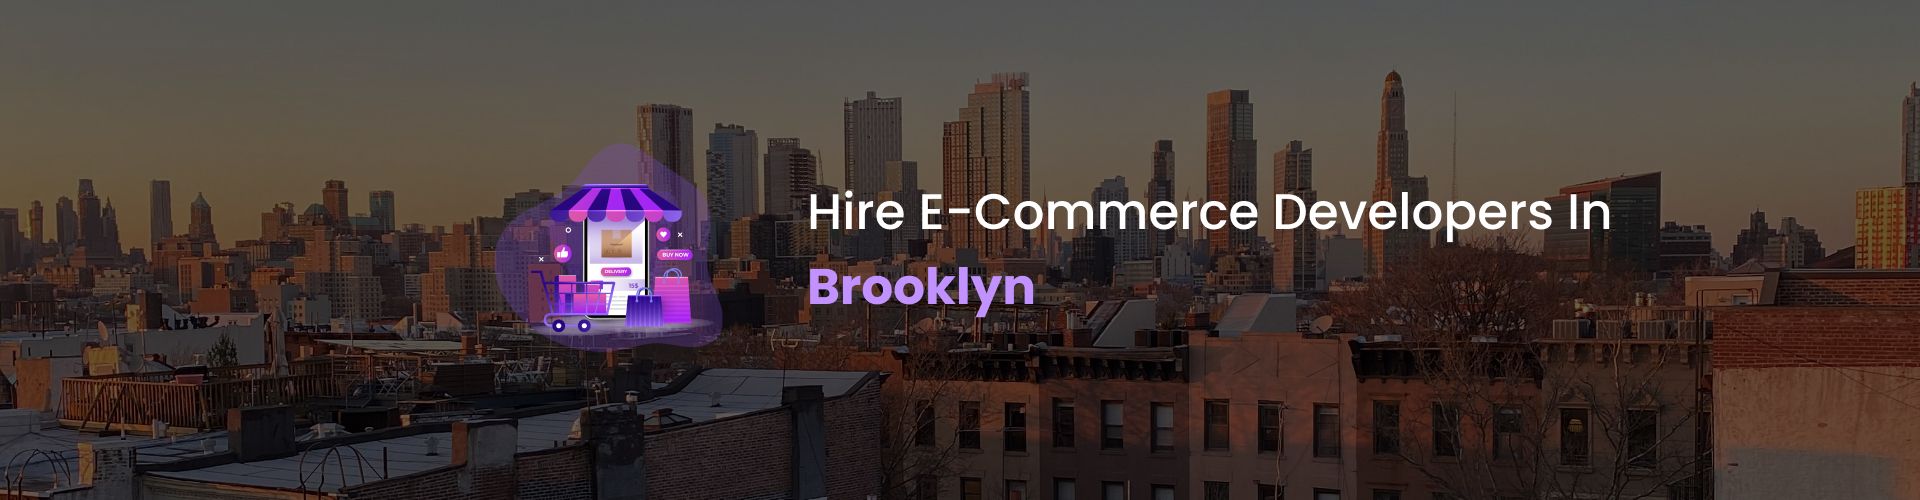 ecommerce developers in brooklyn